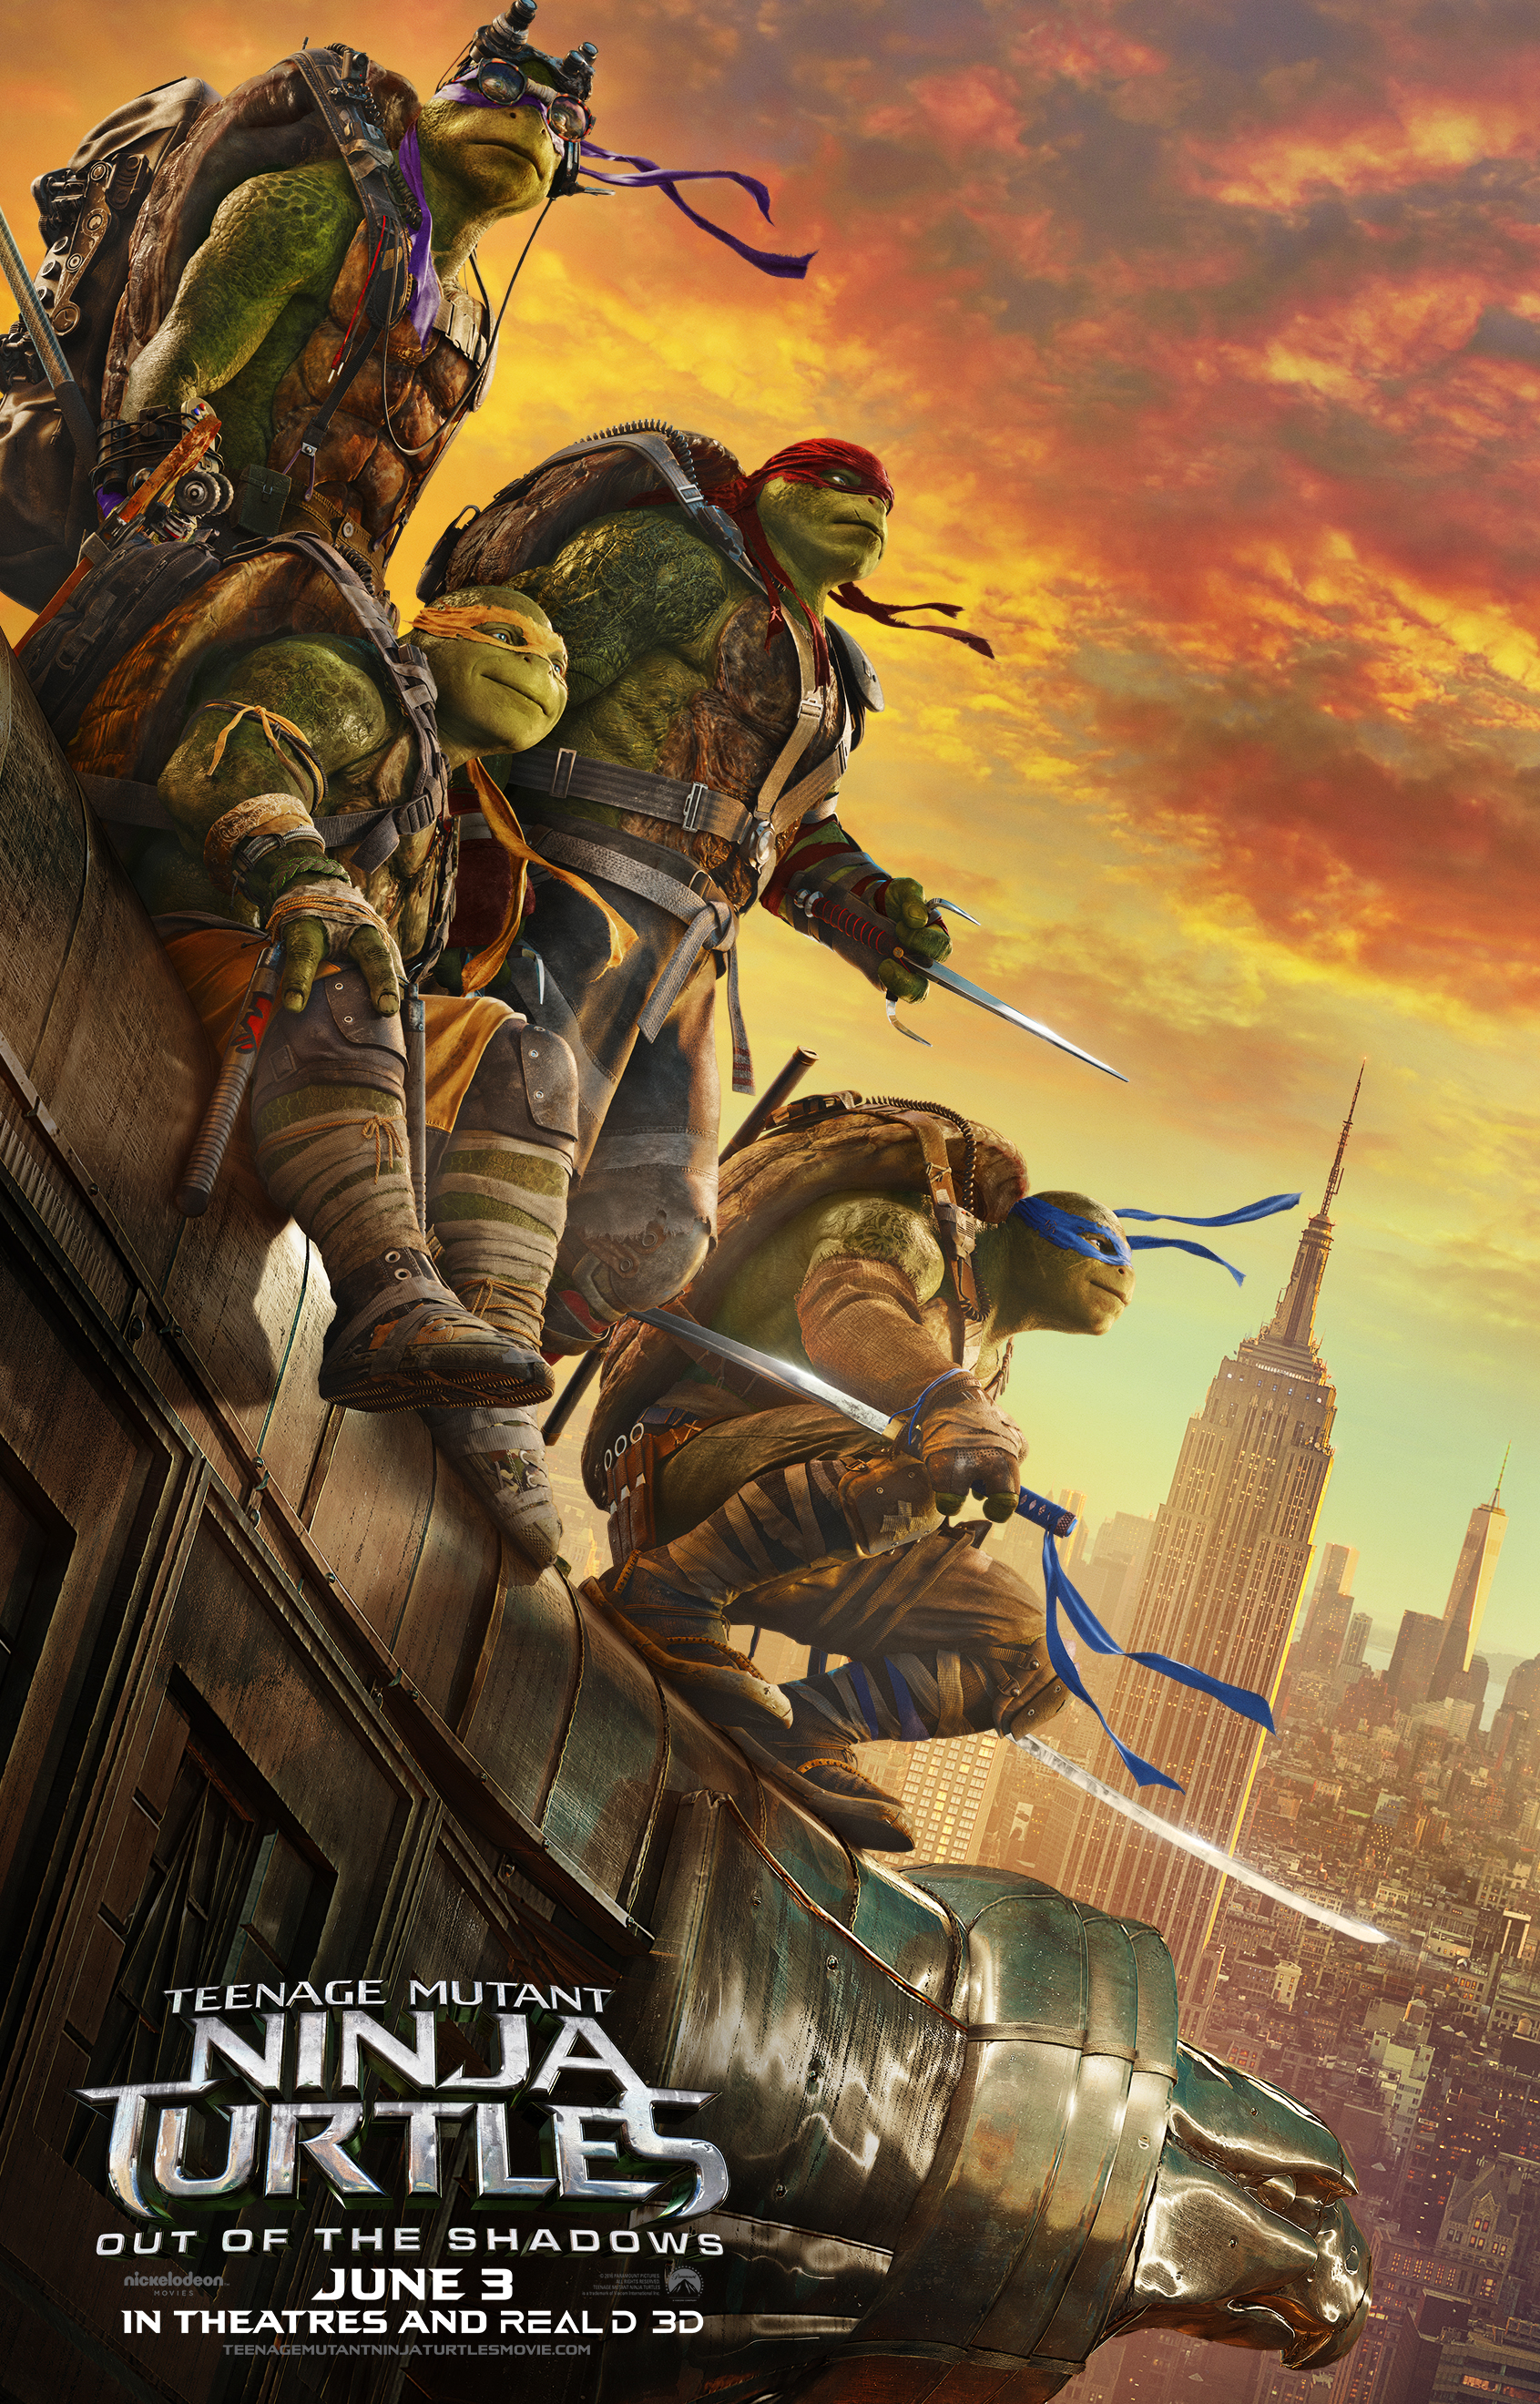 https://static.wikia.nocookie.net/tmnt/images/5/56/TMNT_OOTS_Theatrical_Poster.jpg/revision/latest?cb=20160611163008